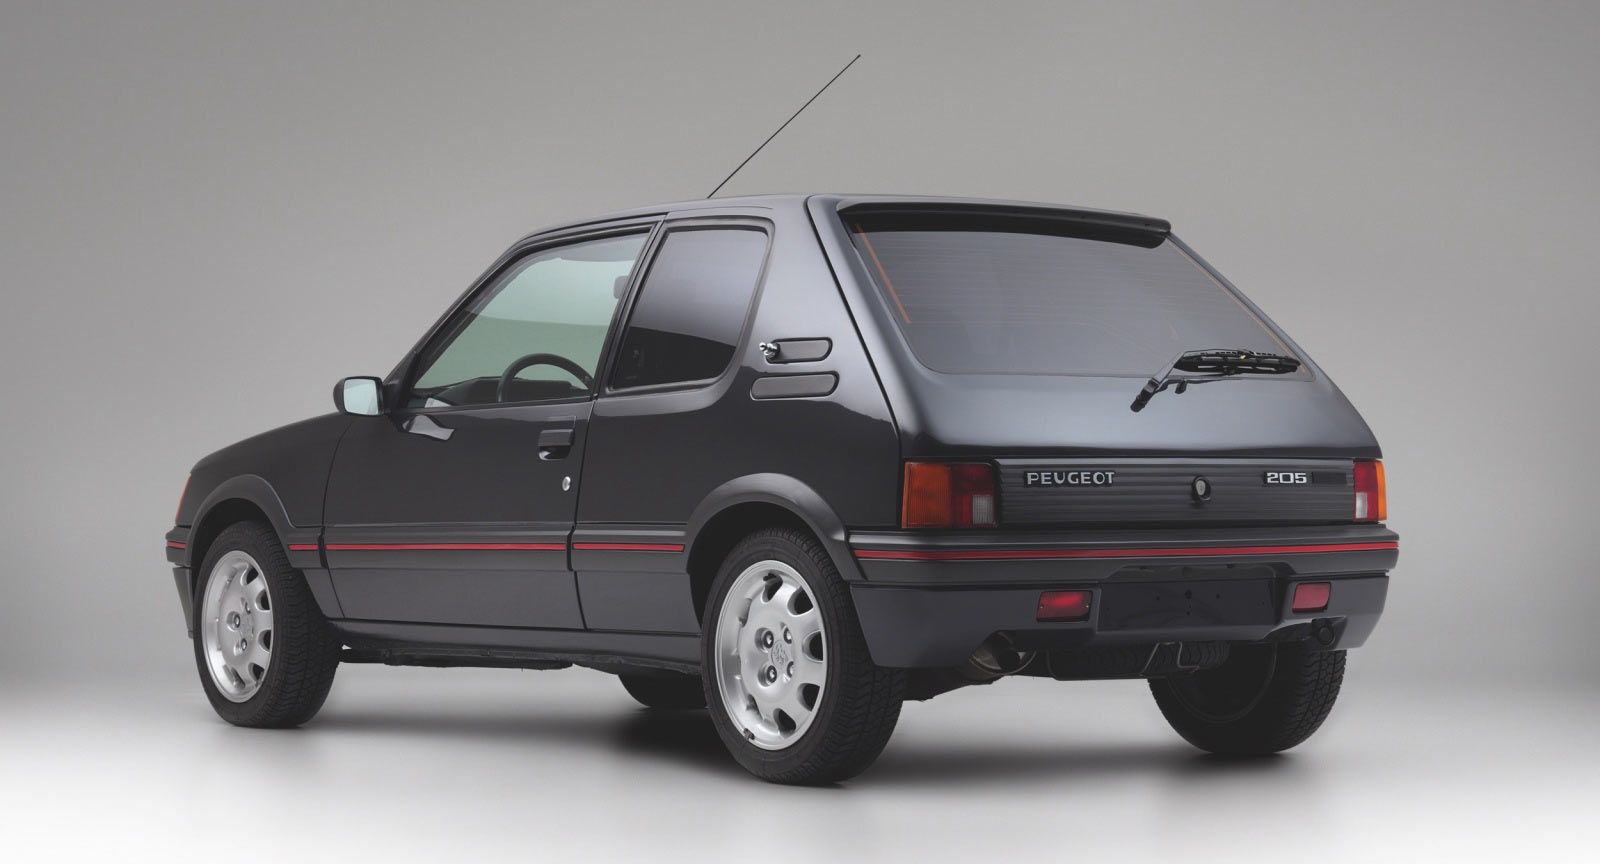 Who Needs An Armored Peugeot 205 GTI? The World's 4th Richest Person,  That's Who